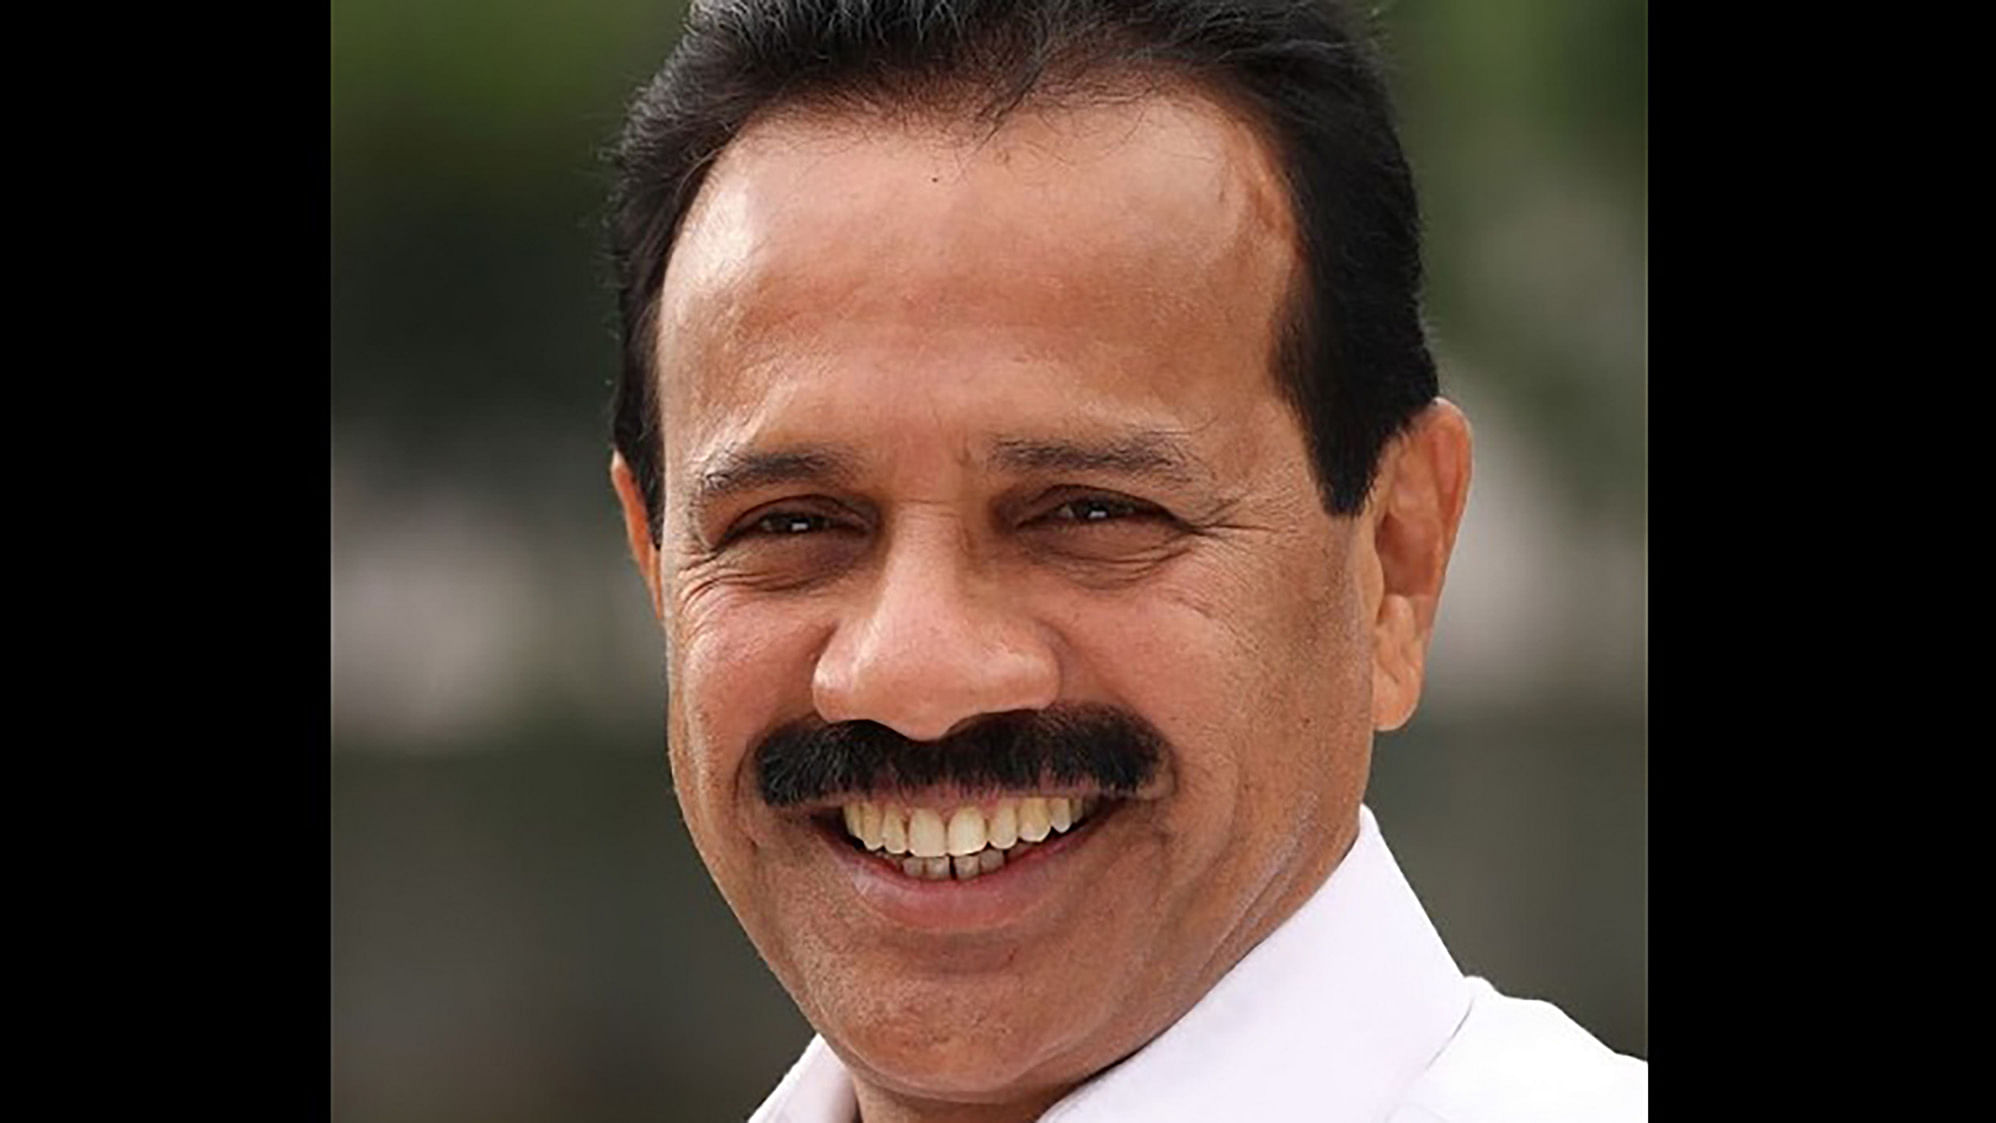   Union Minister for Law and Justice DV Sadananda Gowda. (Photo: TNM)